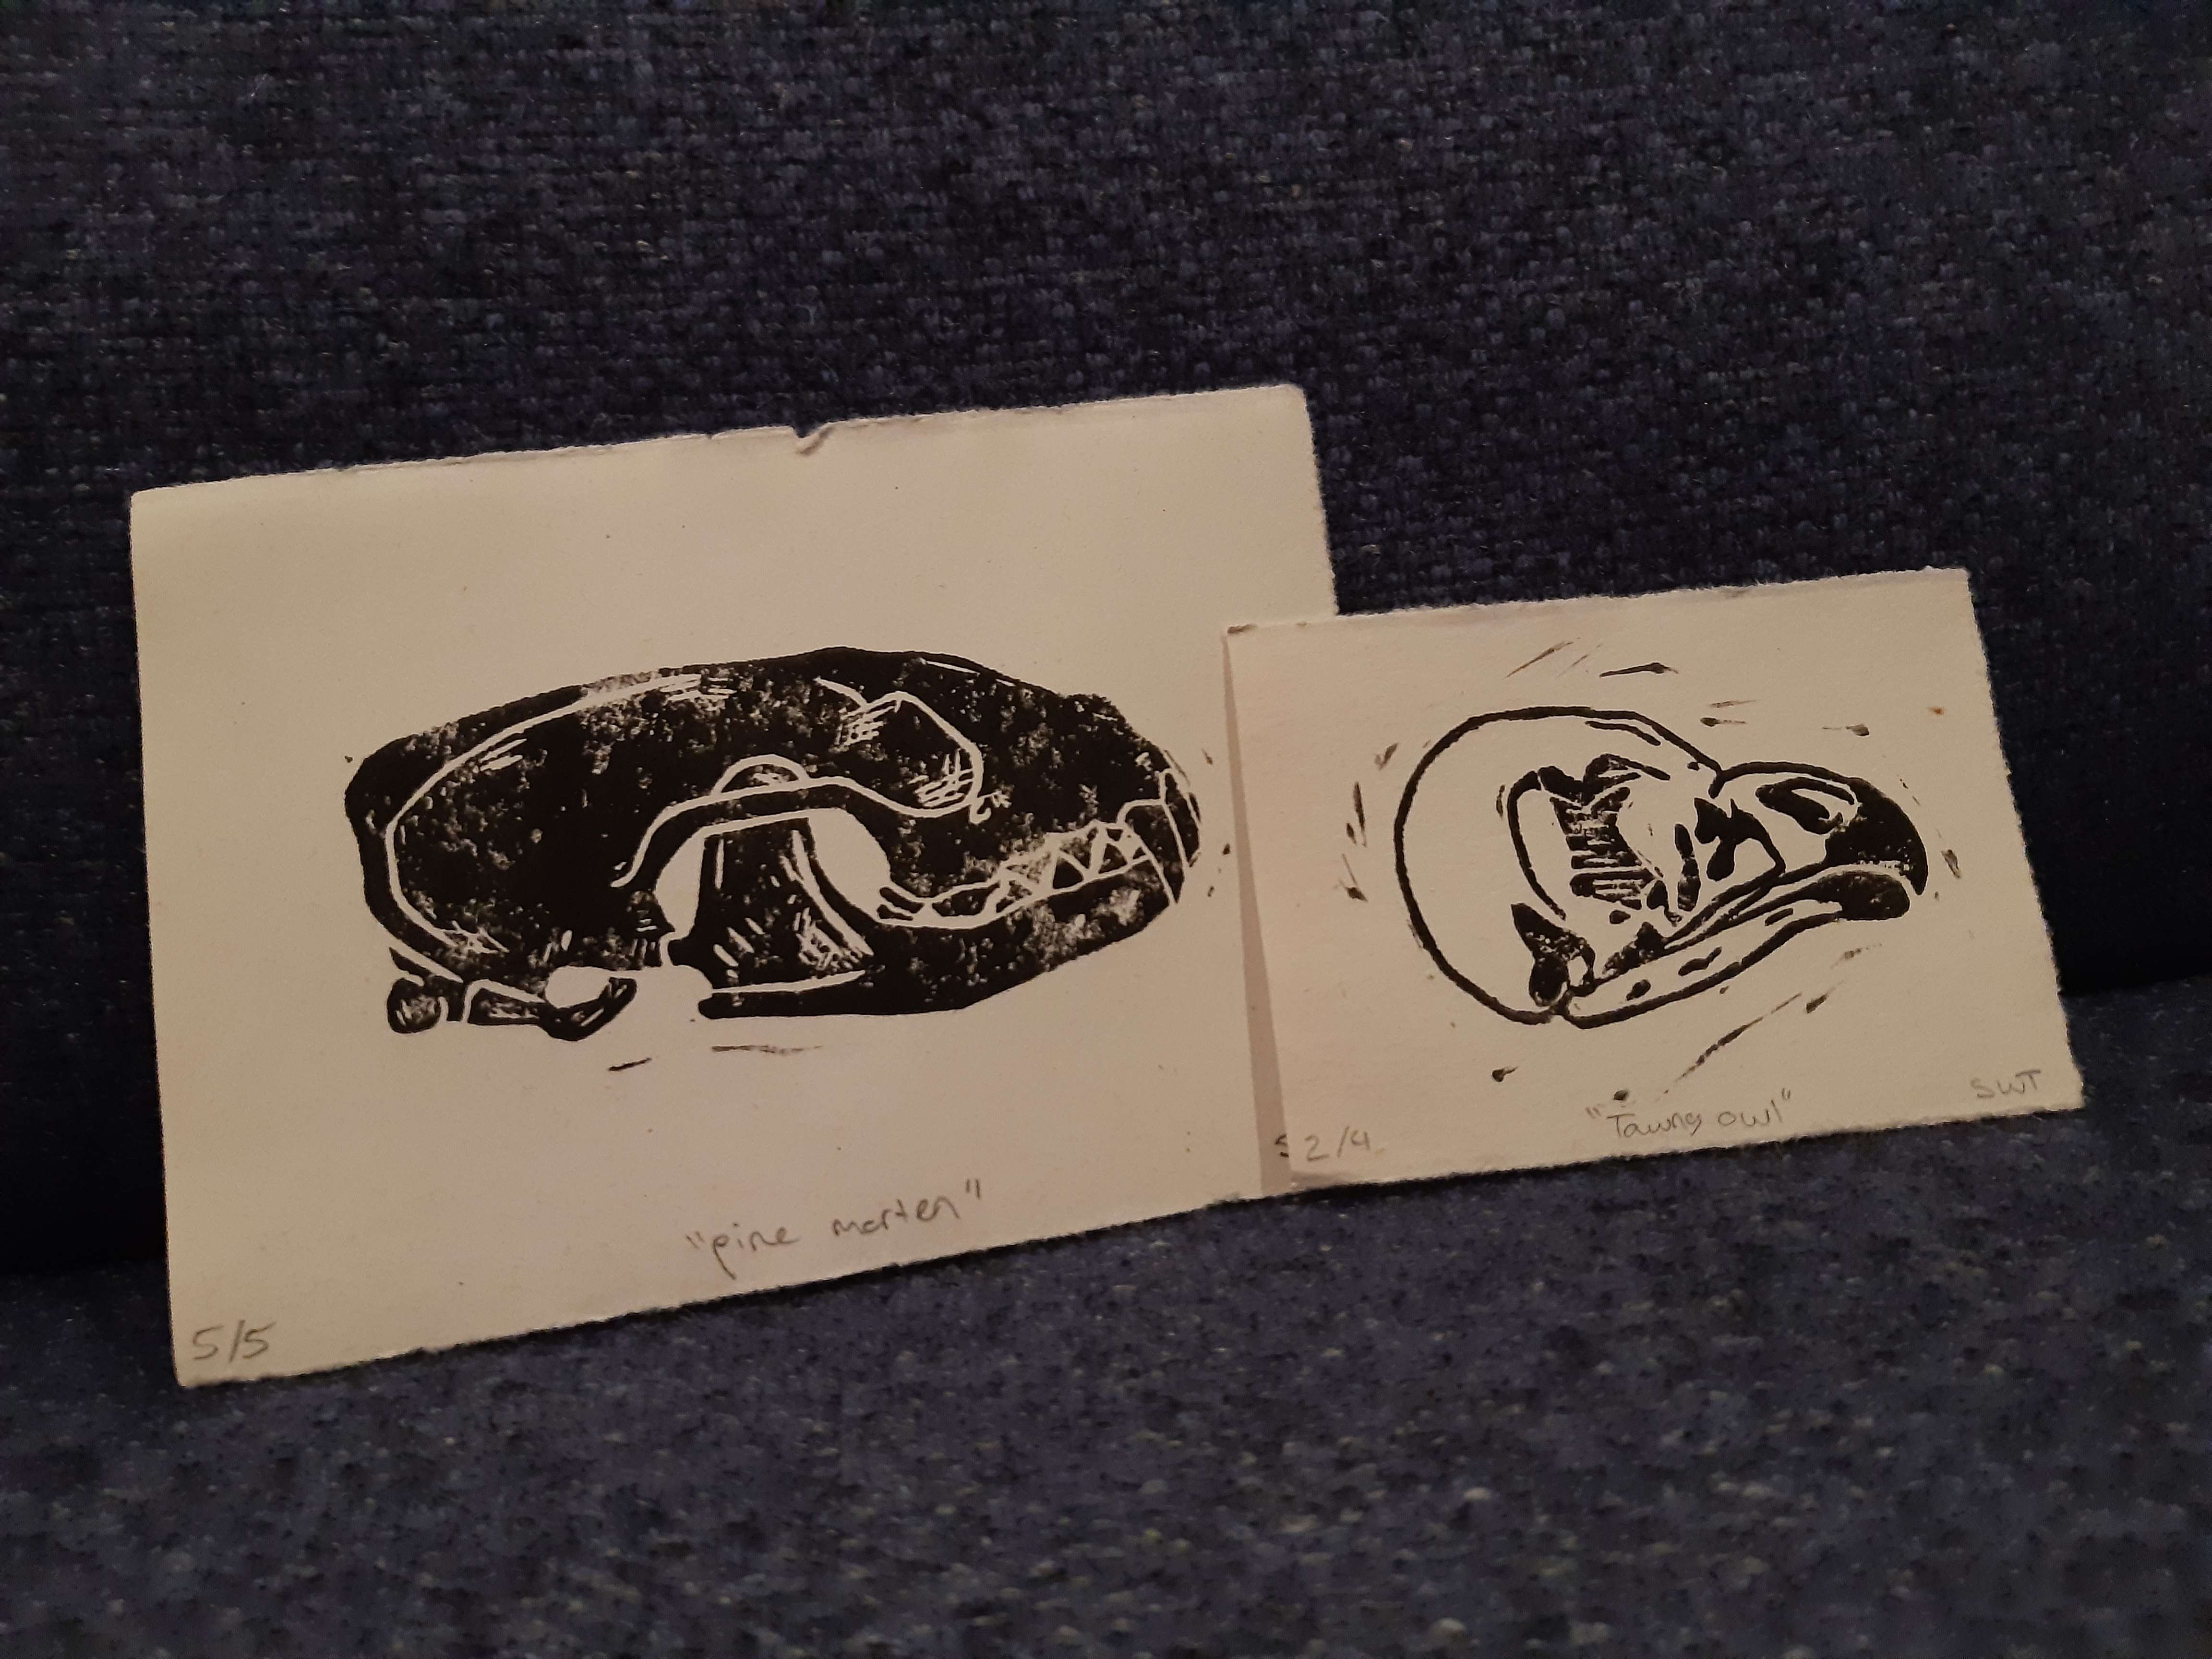 two linocut prints depicting animal skulls from the side.